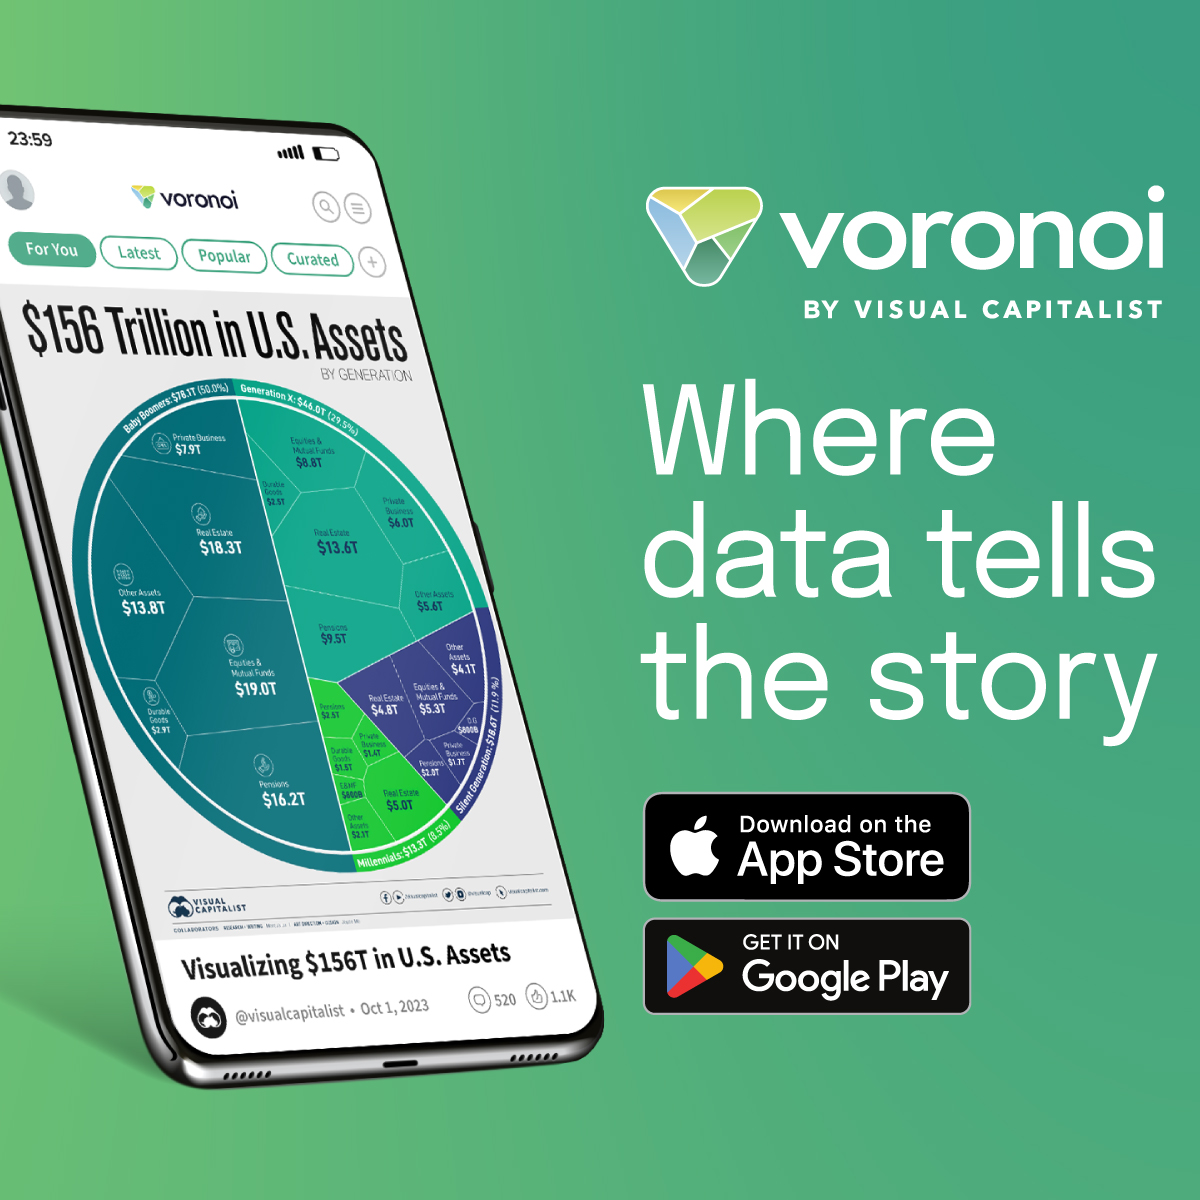 Voronoi, the app by Visual Capitalist. Where data tells the story. Download on App Store or Google Play